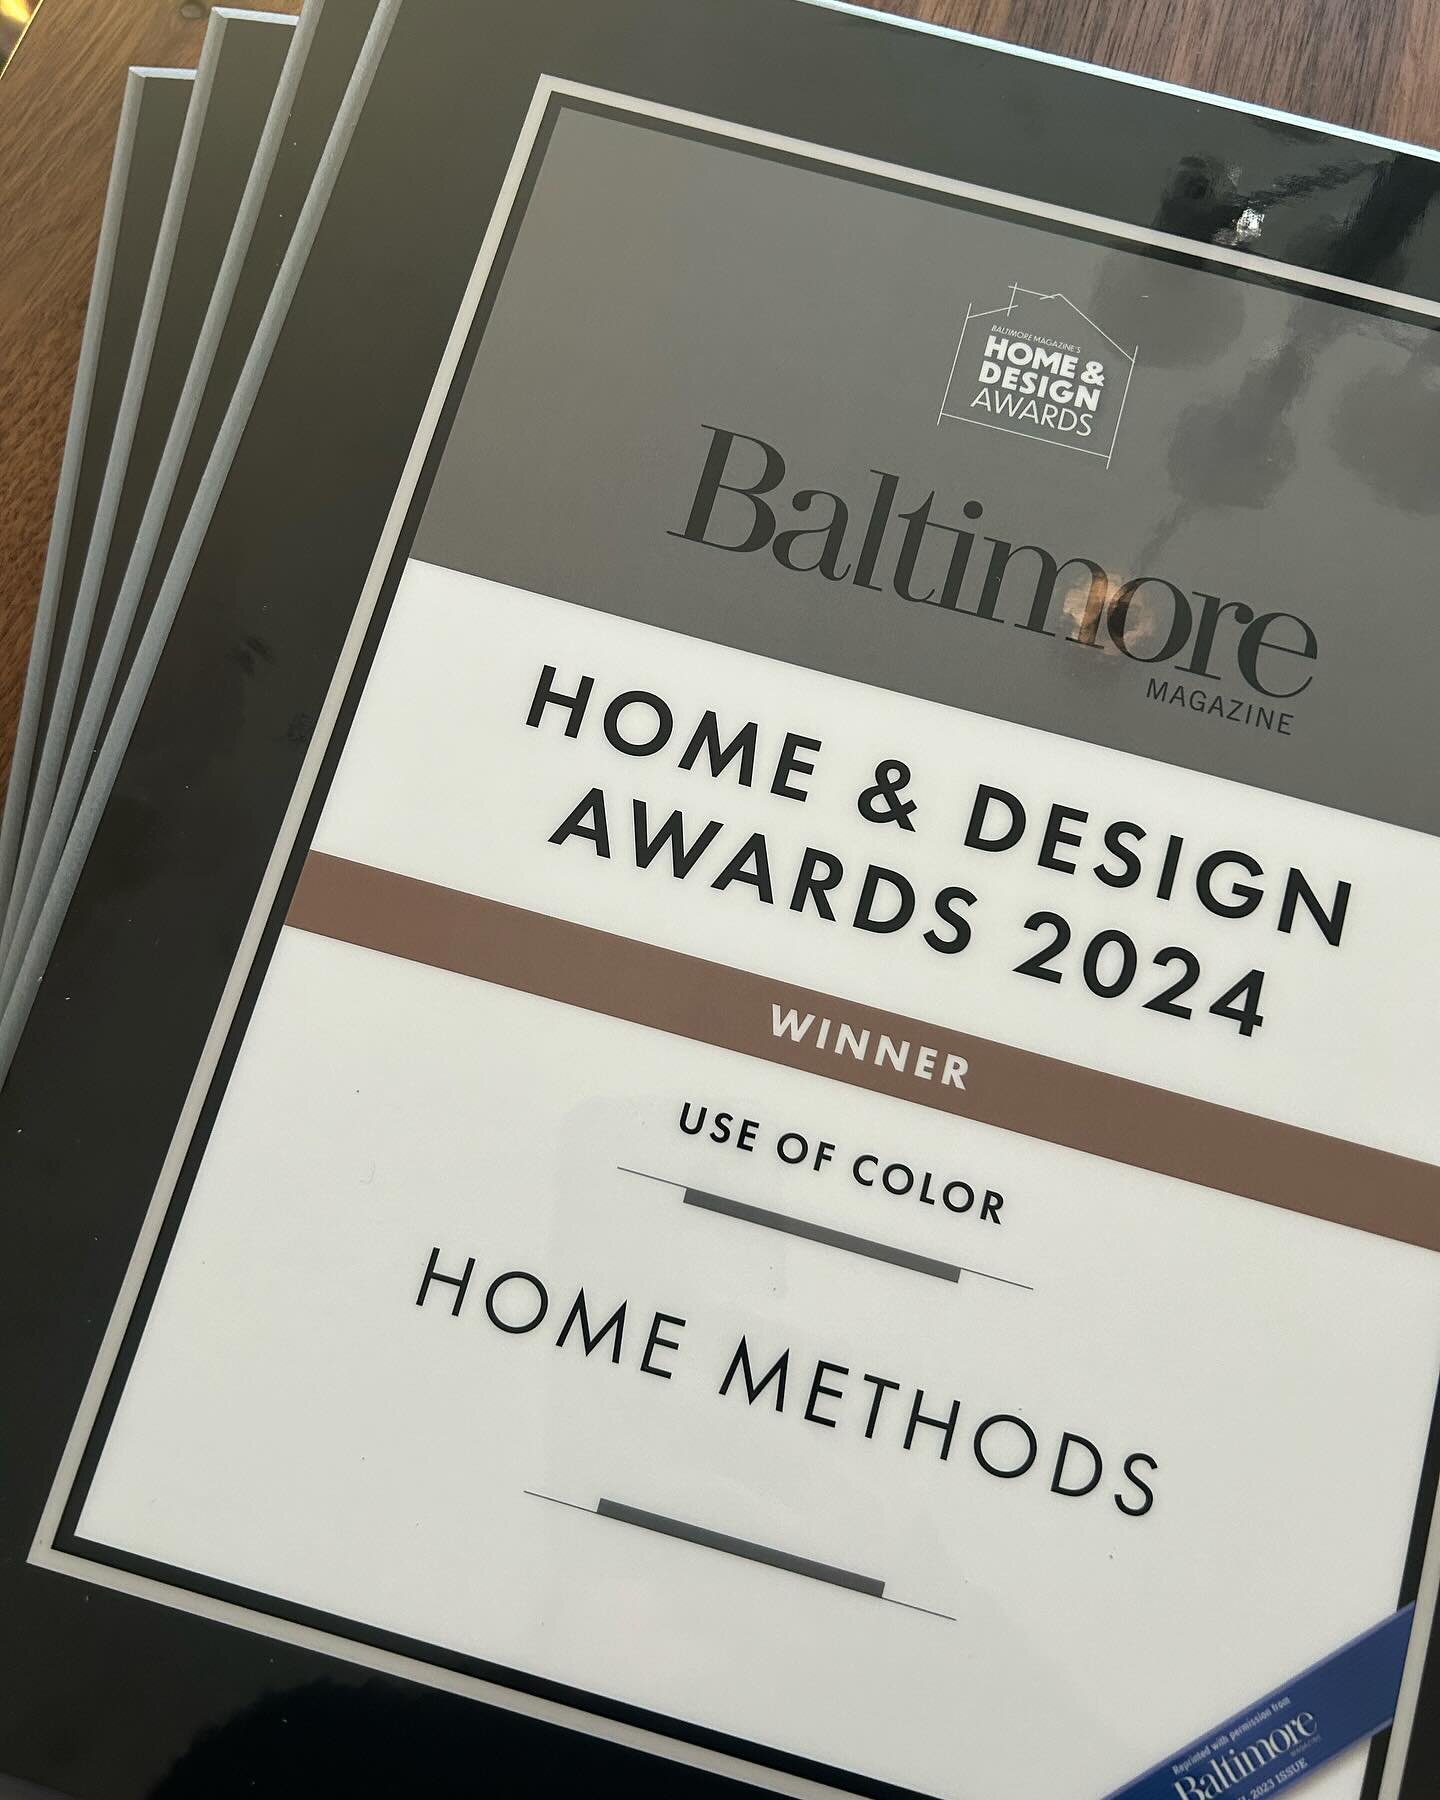 Had the best time last night at the @baltmag home and design awards!! It was so amazing to be honored in 4 different categories but also super humbling to be considered alongside some absolutely outstanding other firms who do some jaw-dropping work (